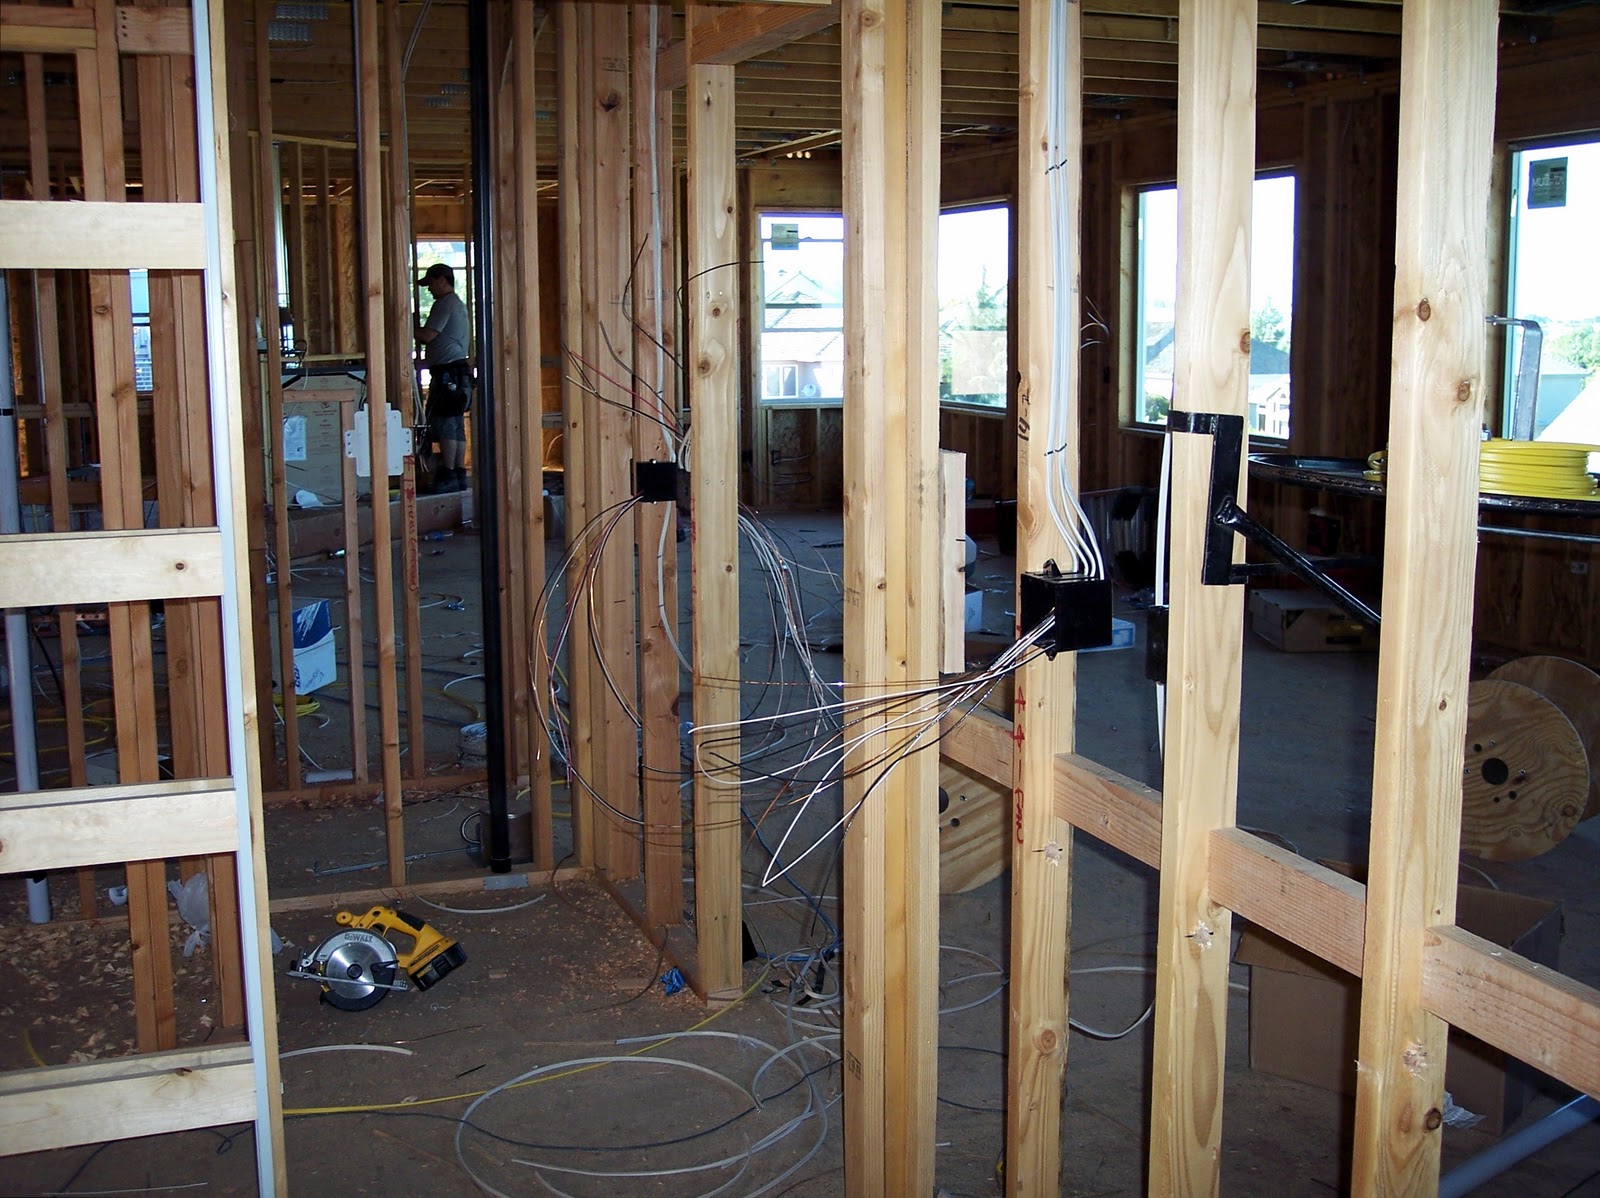 Building a Home: Low Voltage and other Home Wiring